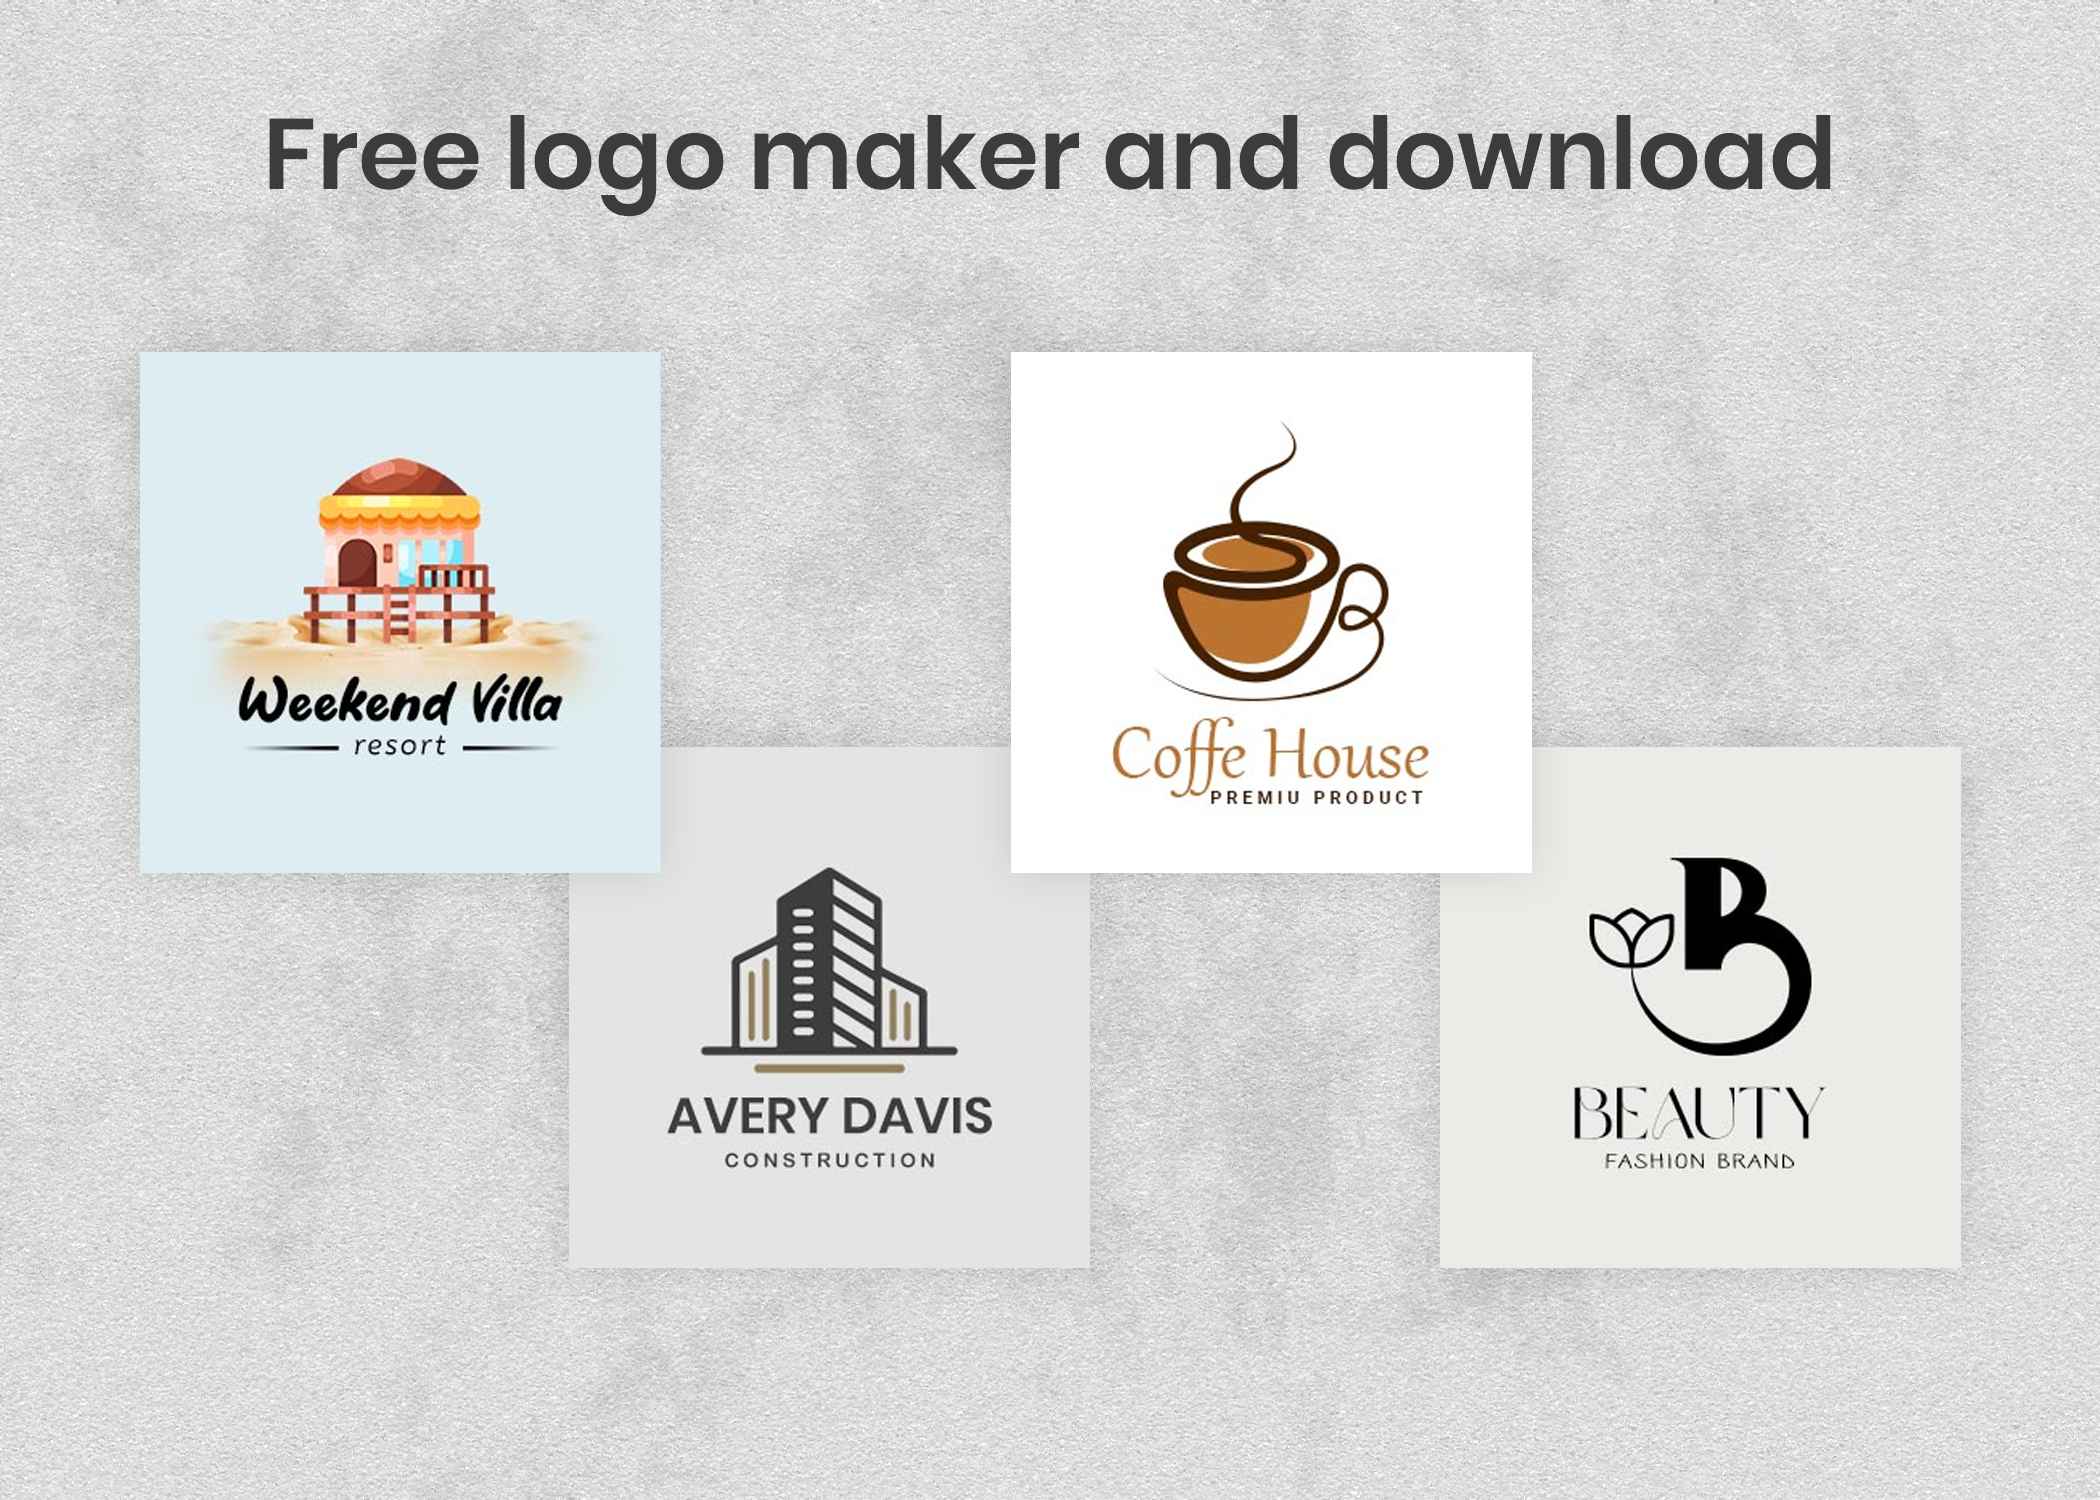 free logo maker and download